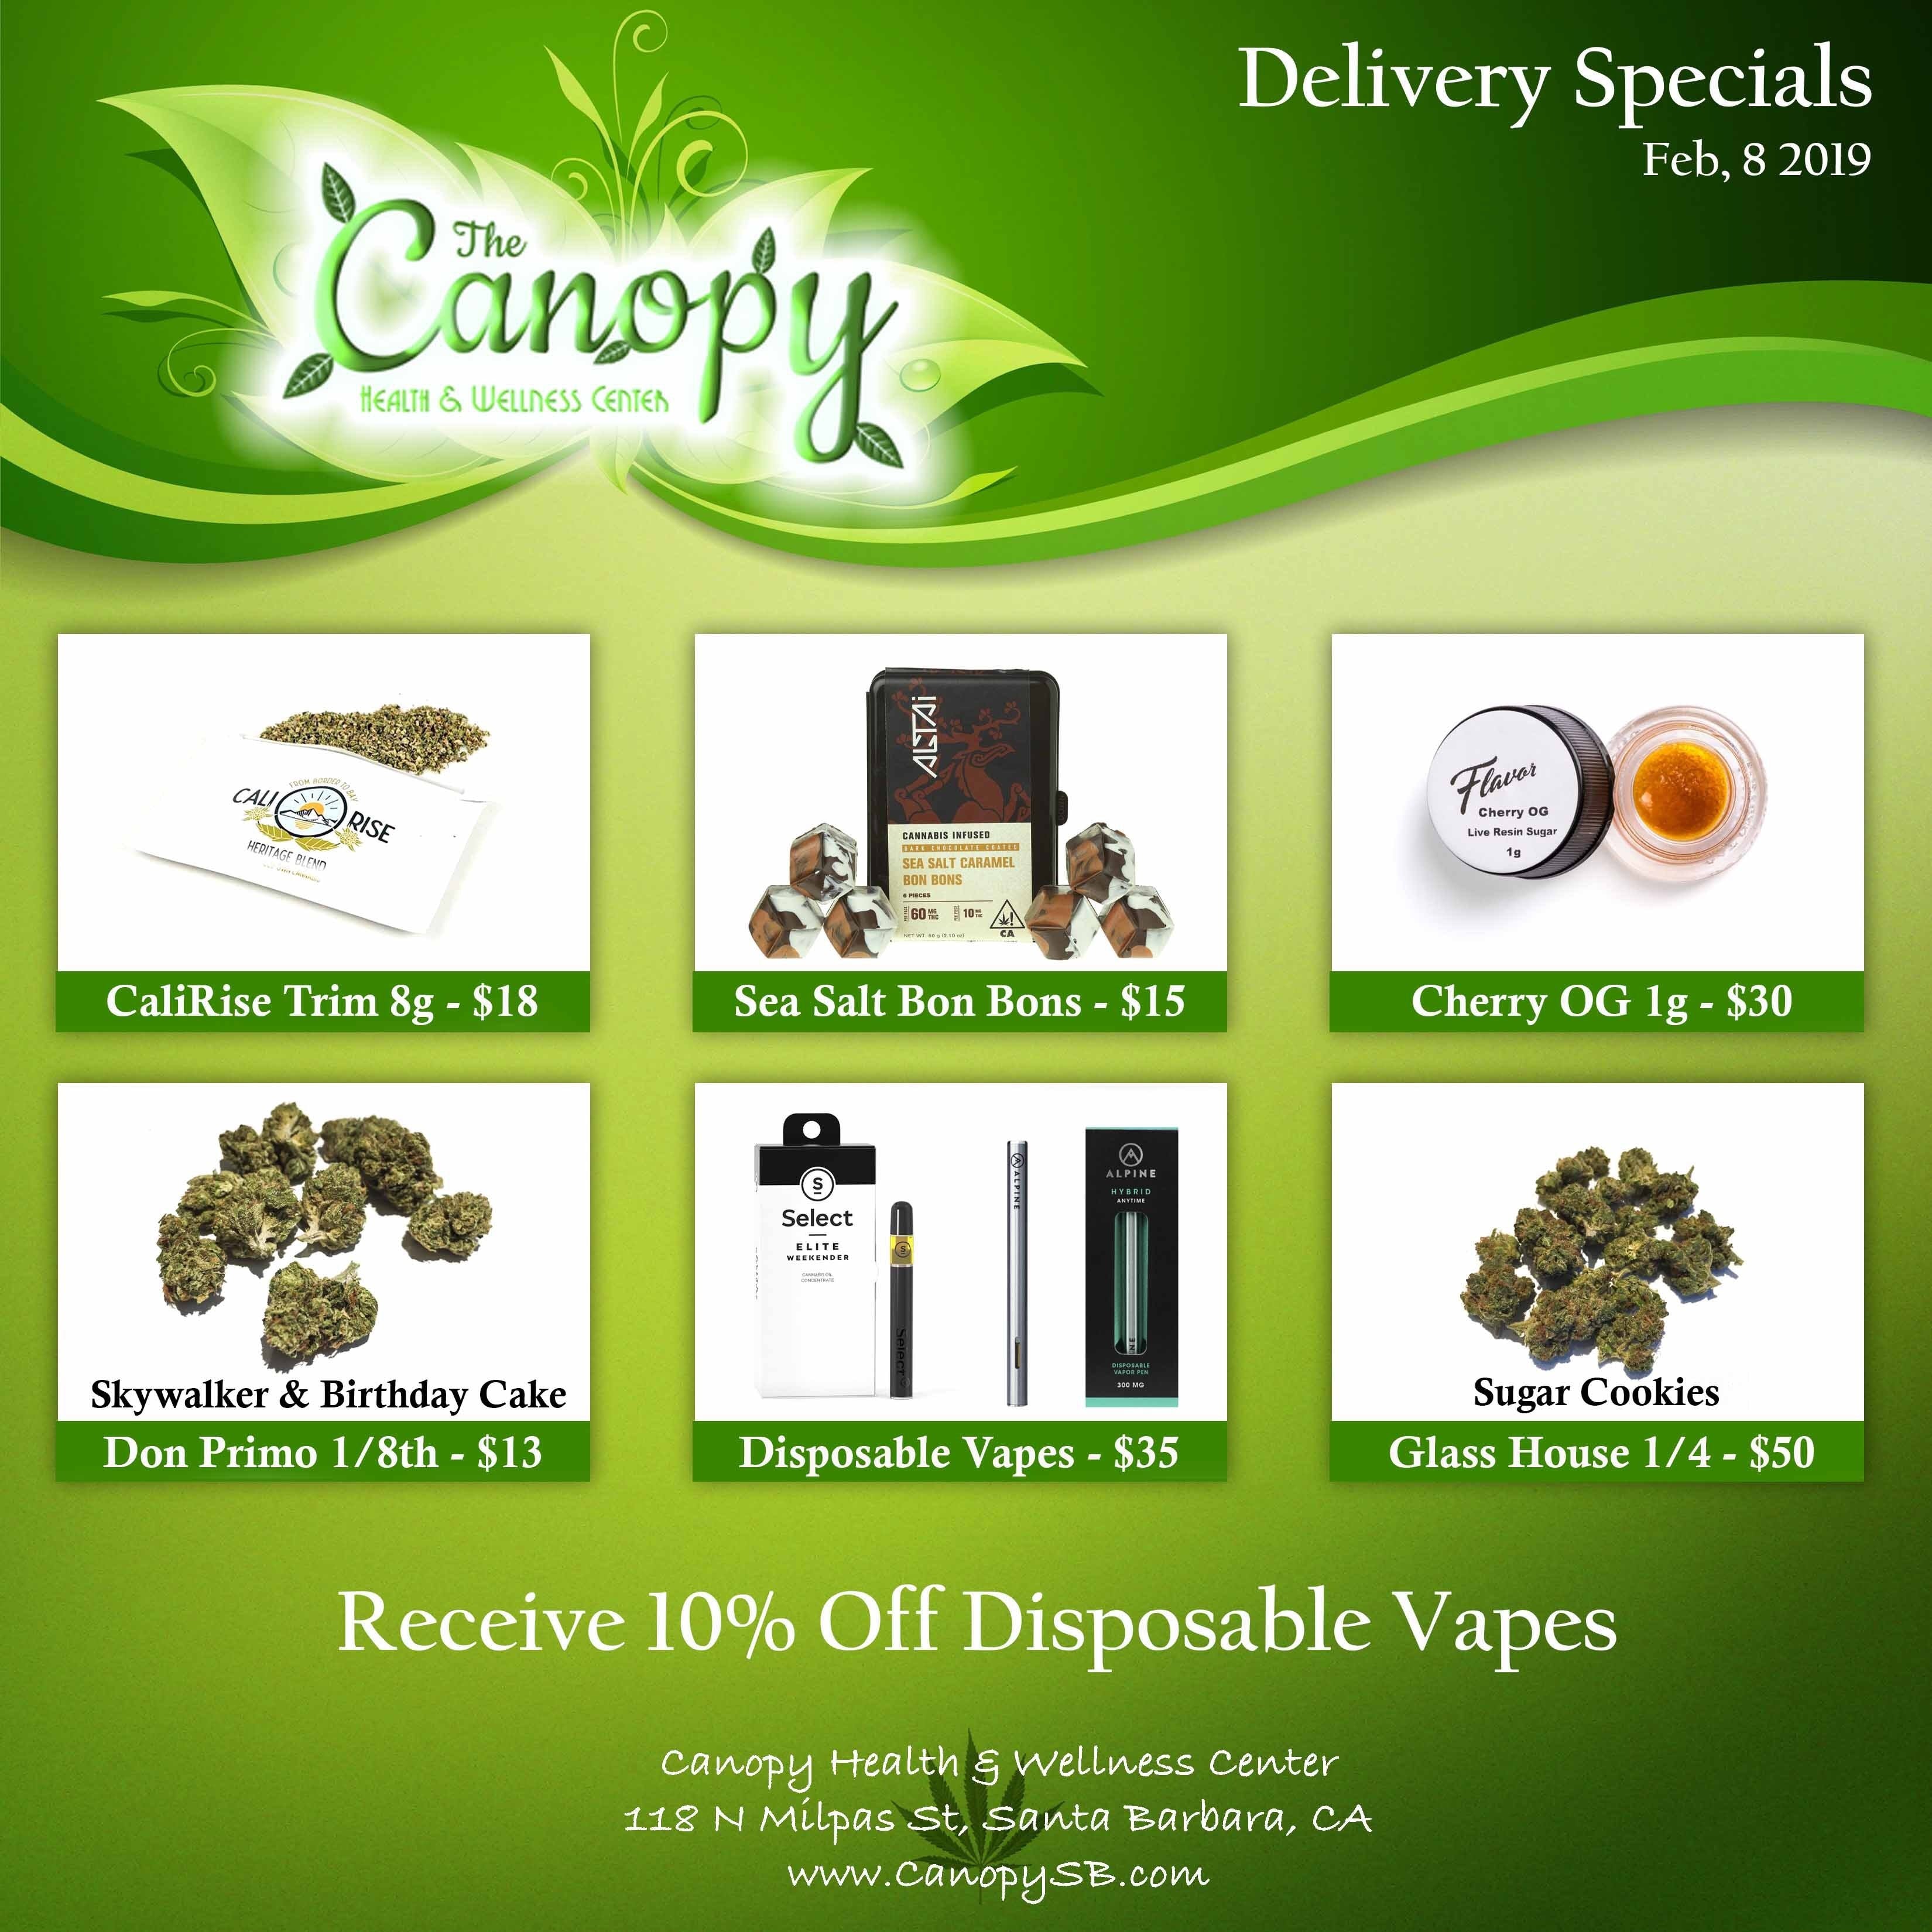 All Delivery Specials!!!!